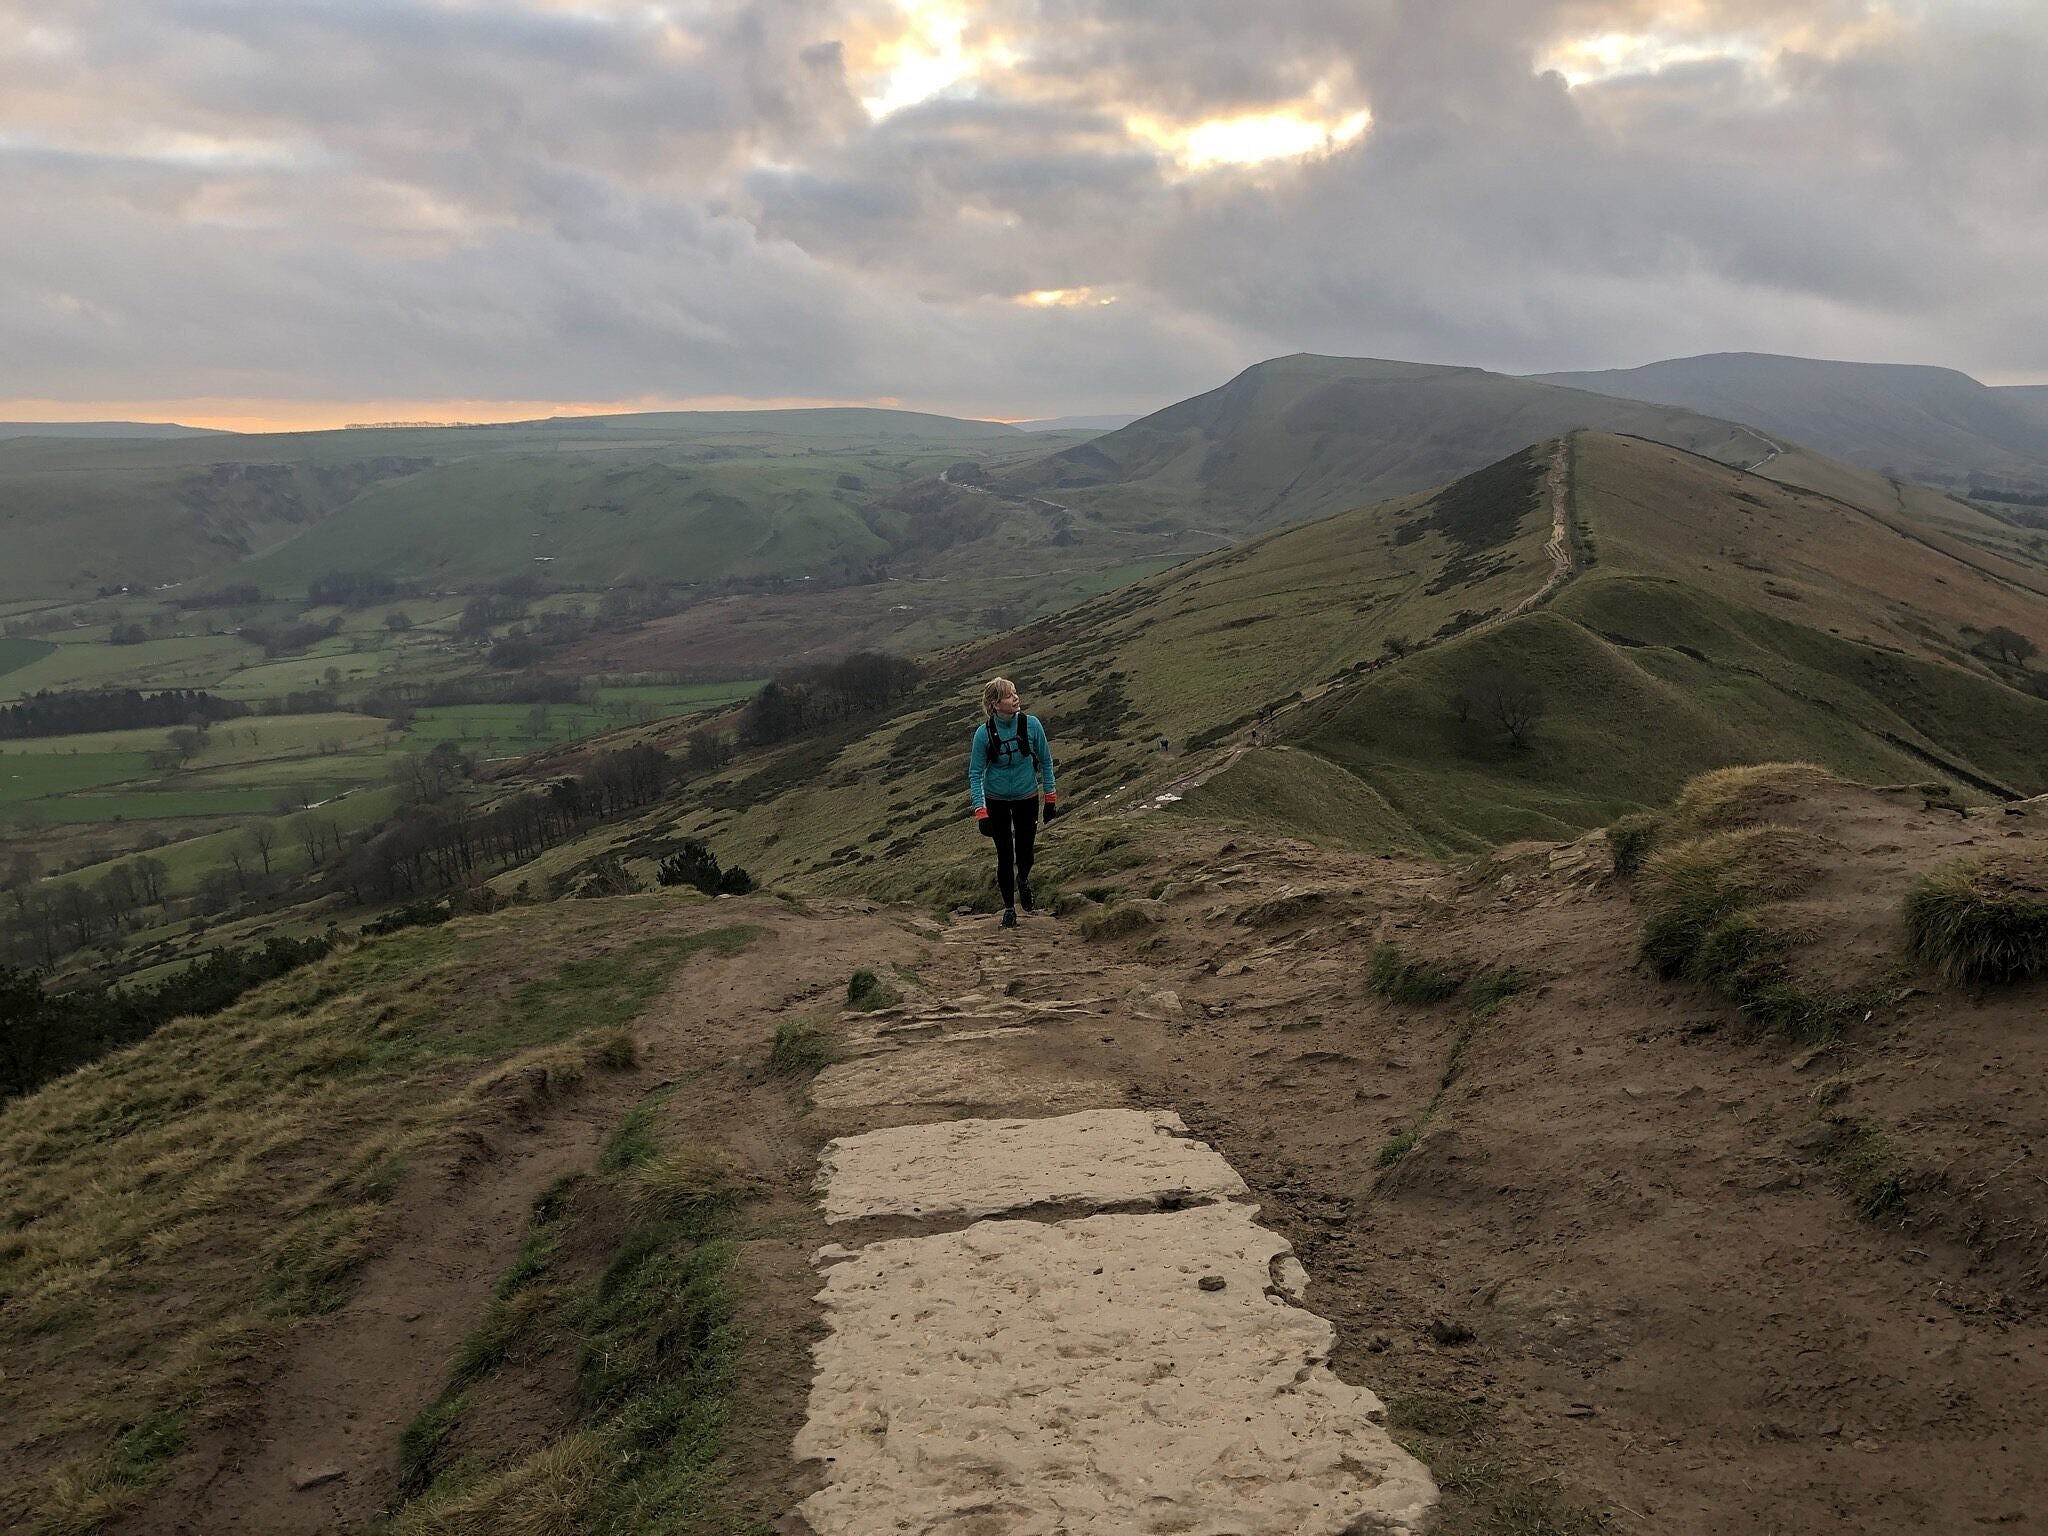 Nearing the end with Mam Tor behind  © Nick Brown - UKC